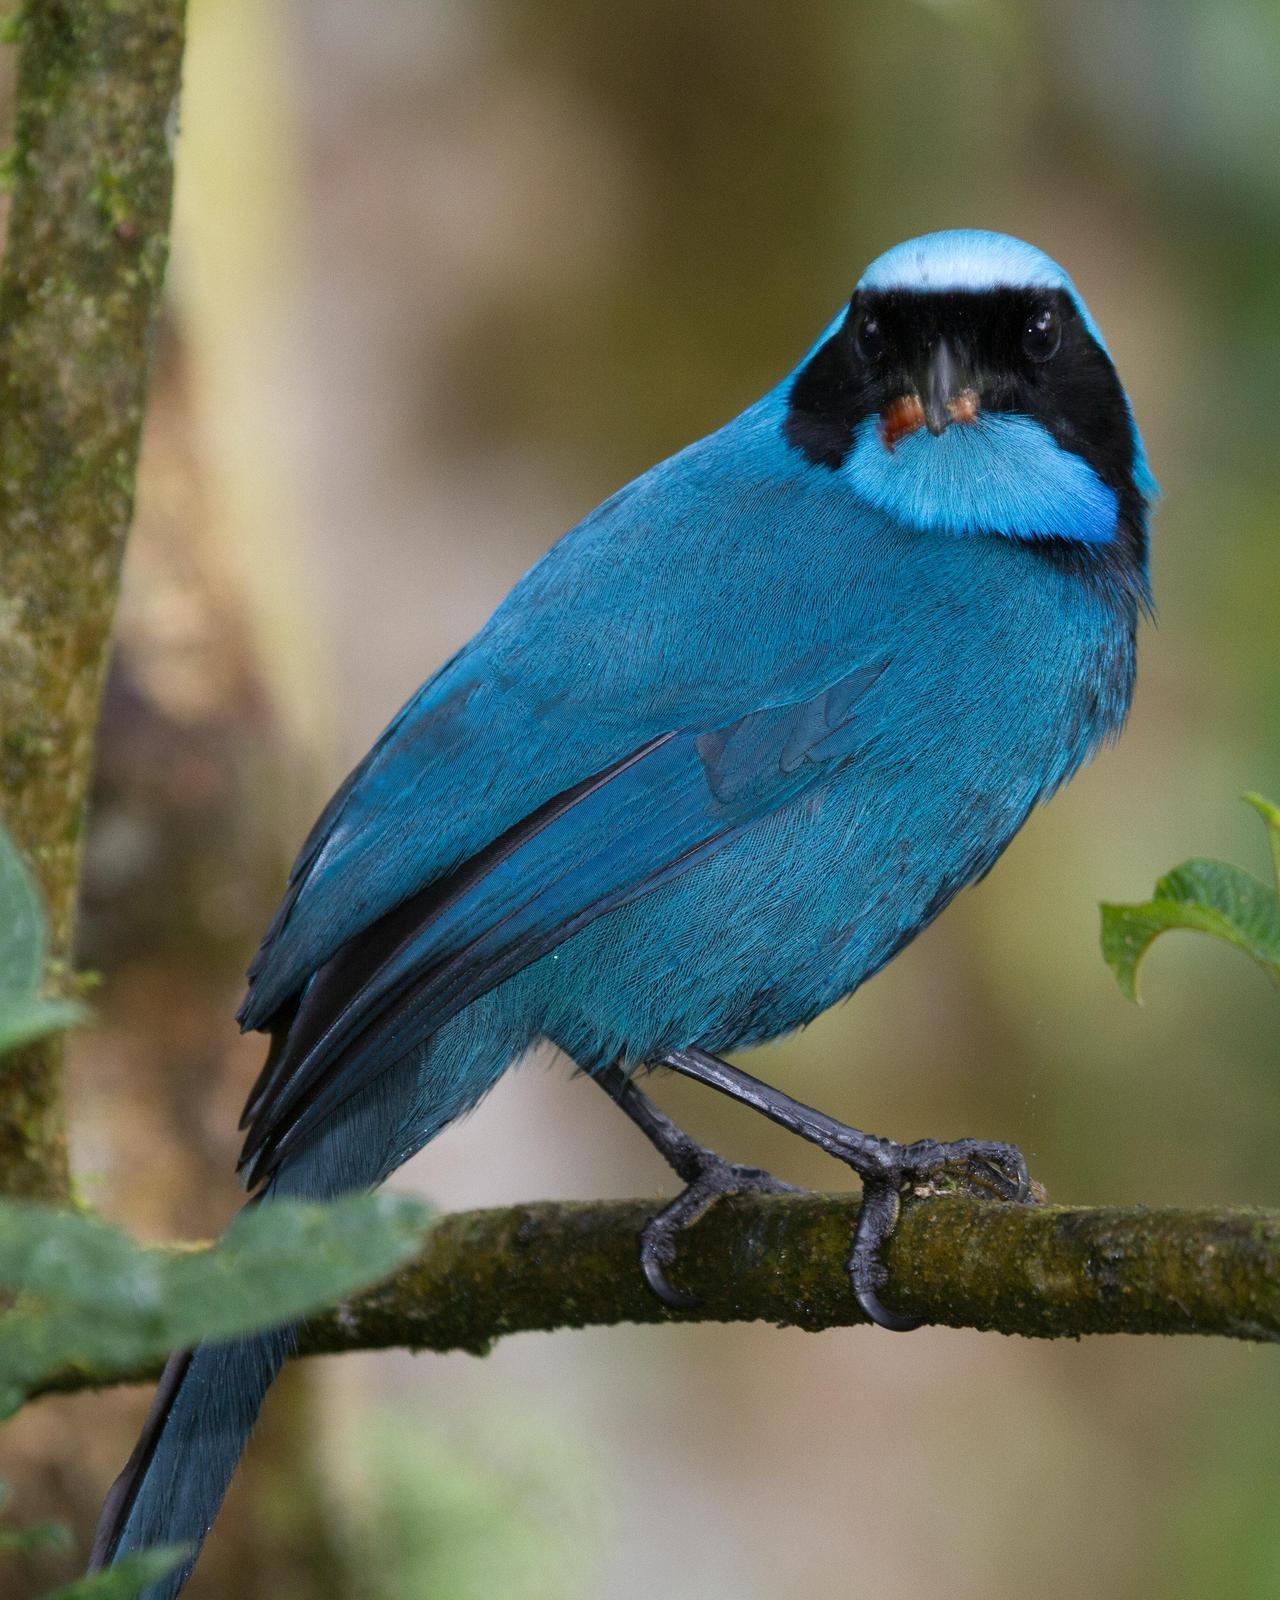 Turquoise Jay Photo by Robert Lewis